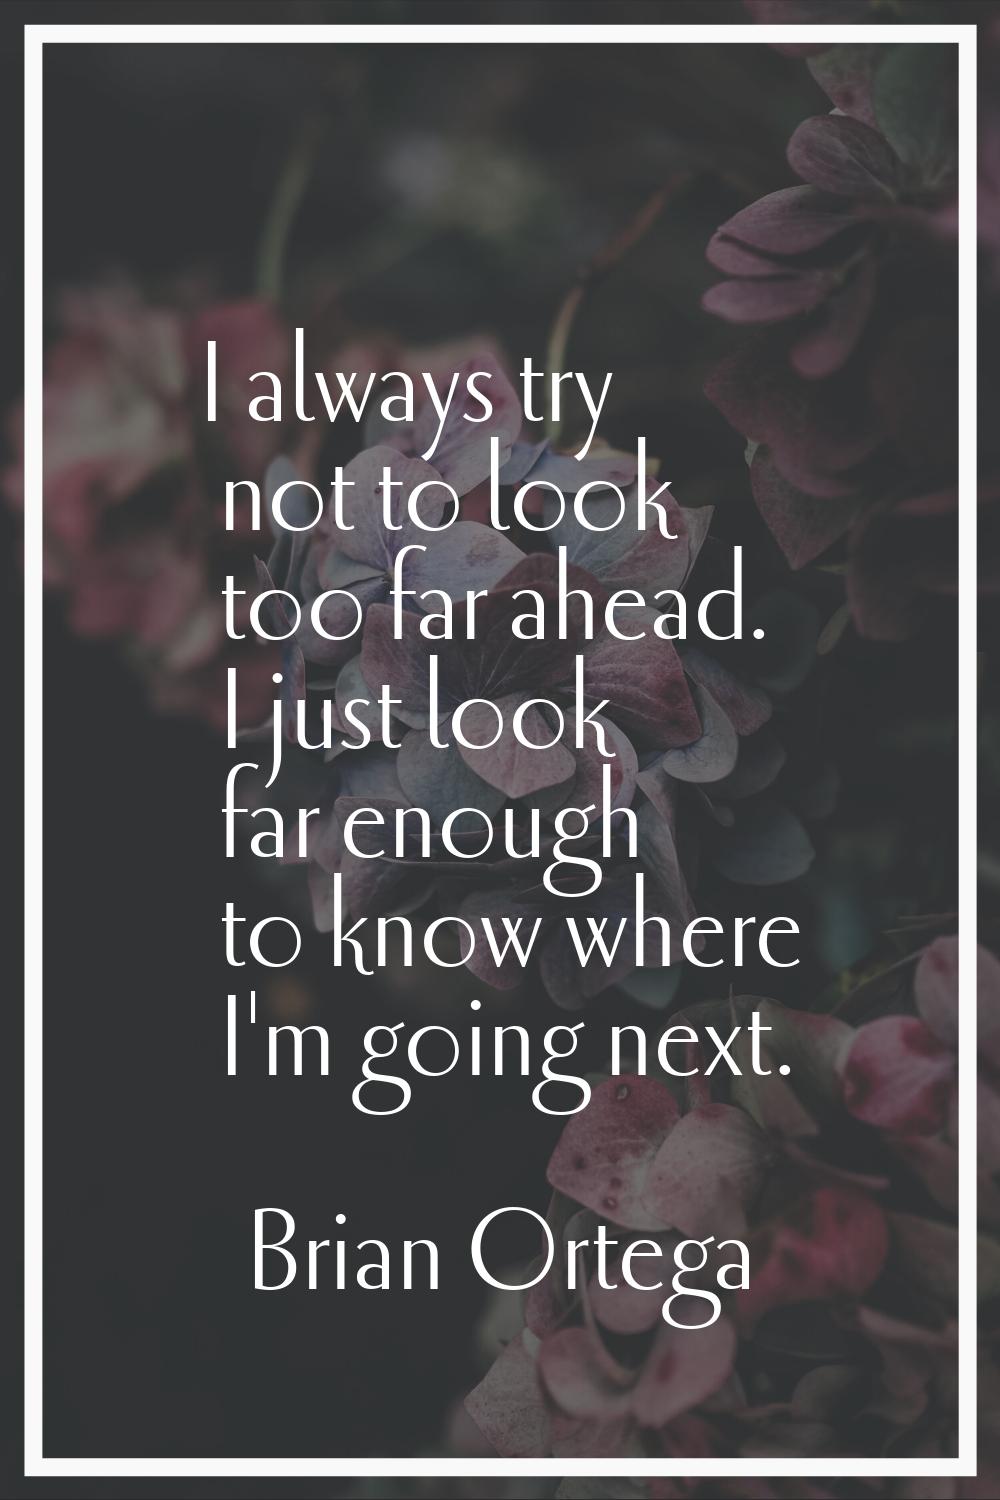 I always try not to look too far ahead. I just look far enough to know where I'm going next.